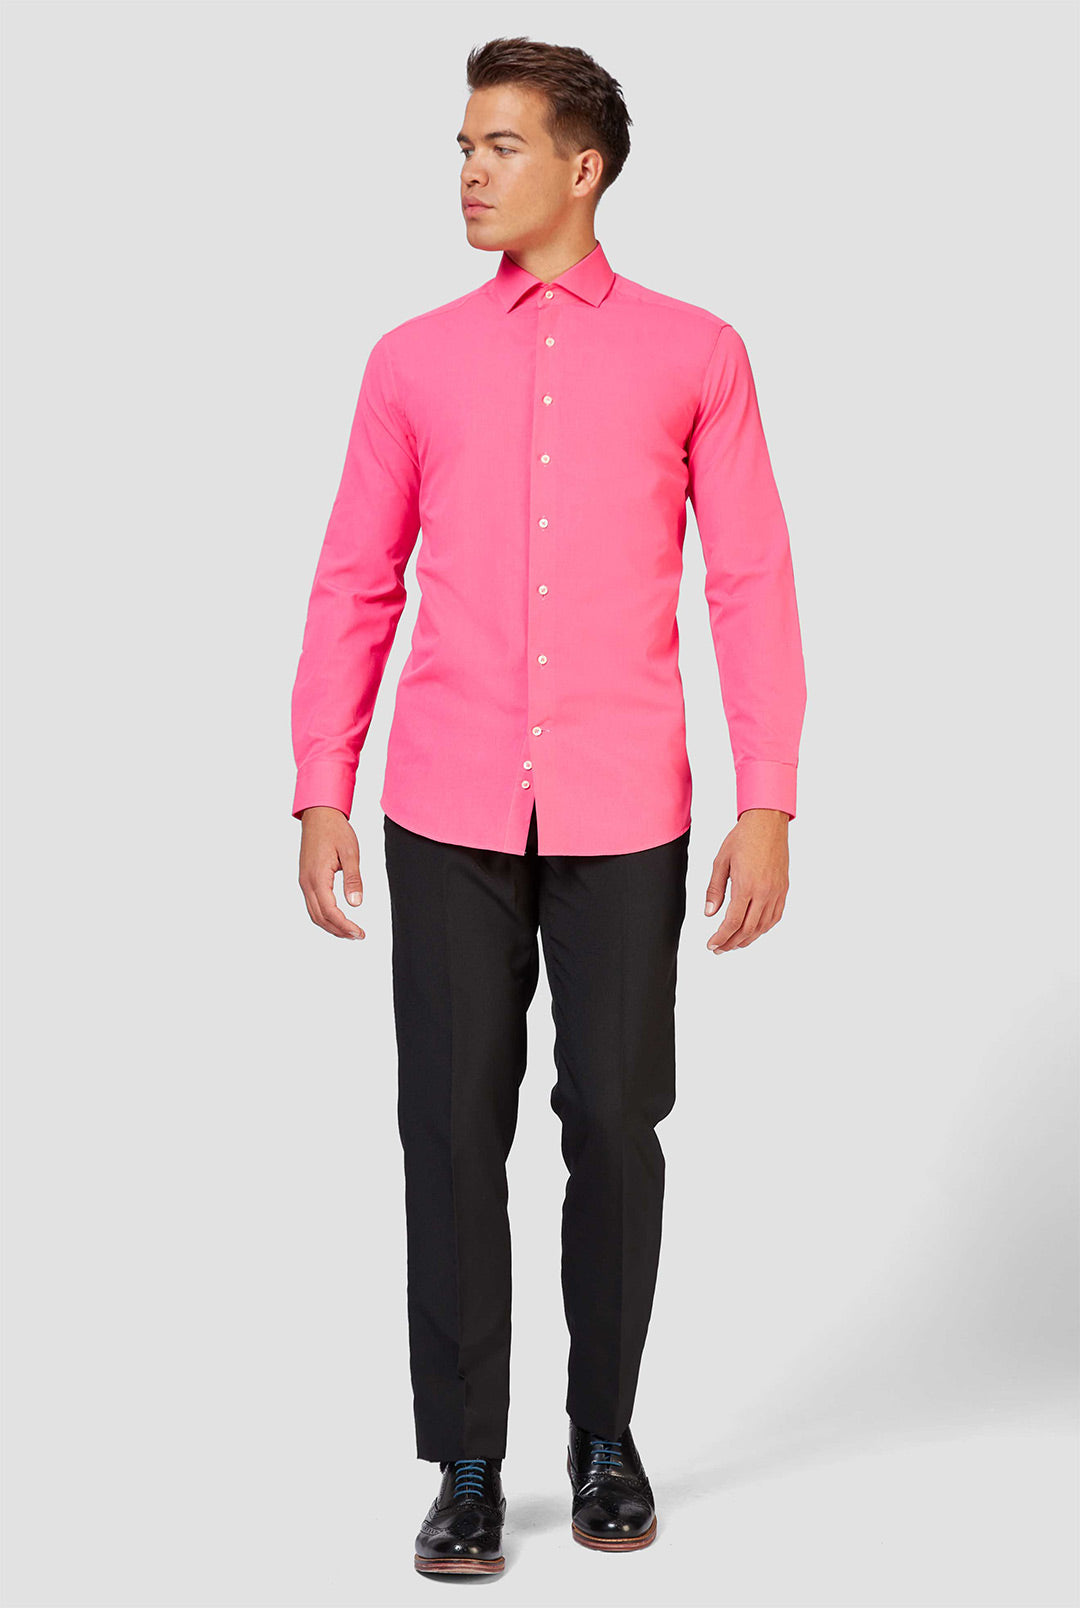 Introducing men's outfits that incorporate pink pants in a classy way! |  Men's Fashion Media OTOKOMAE